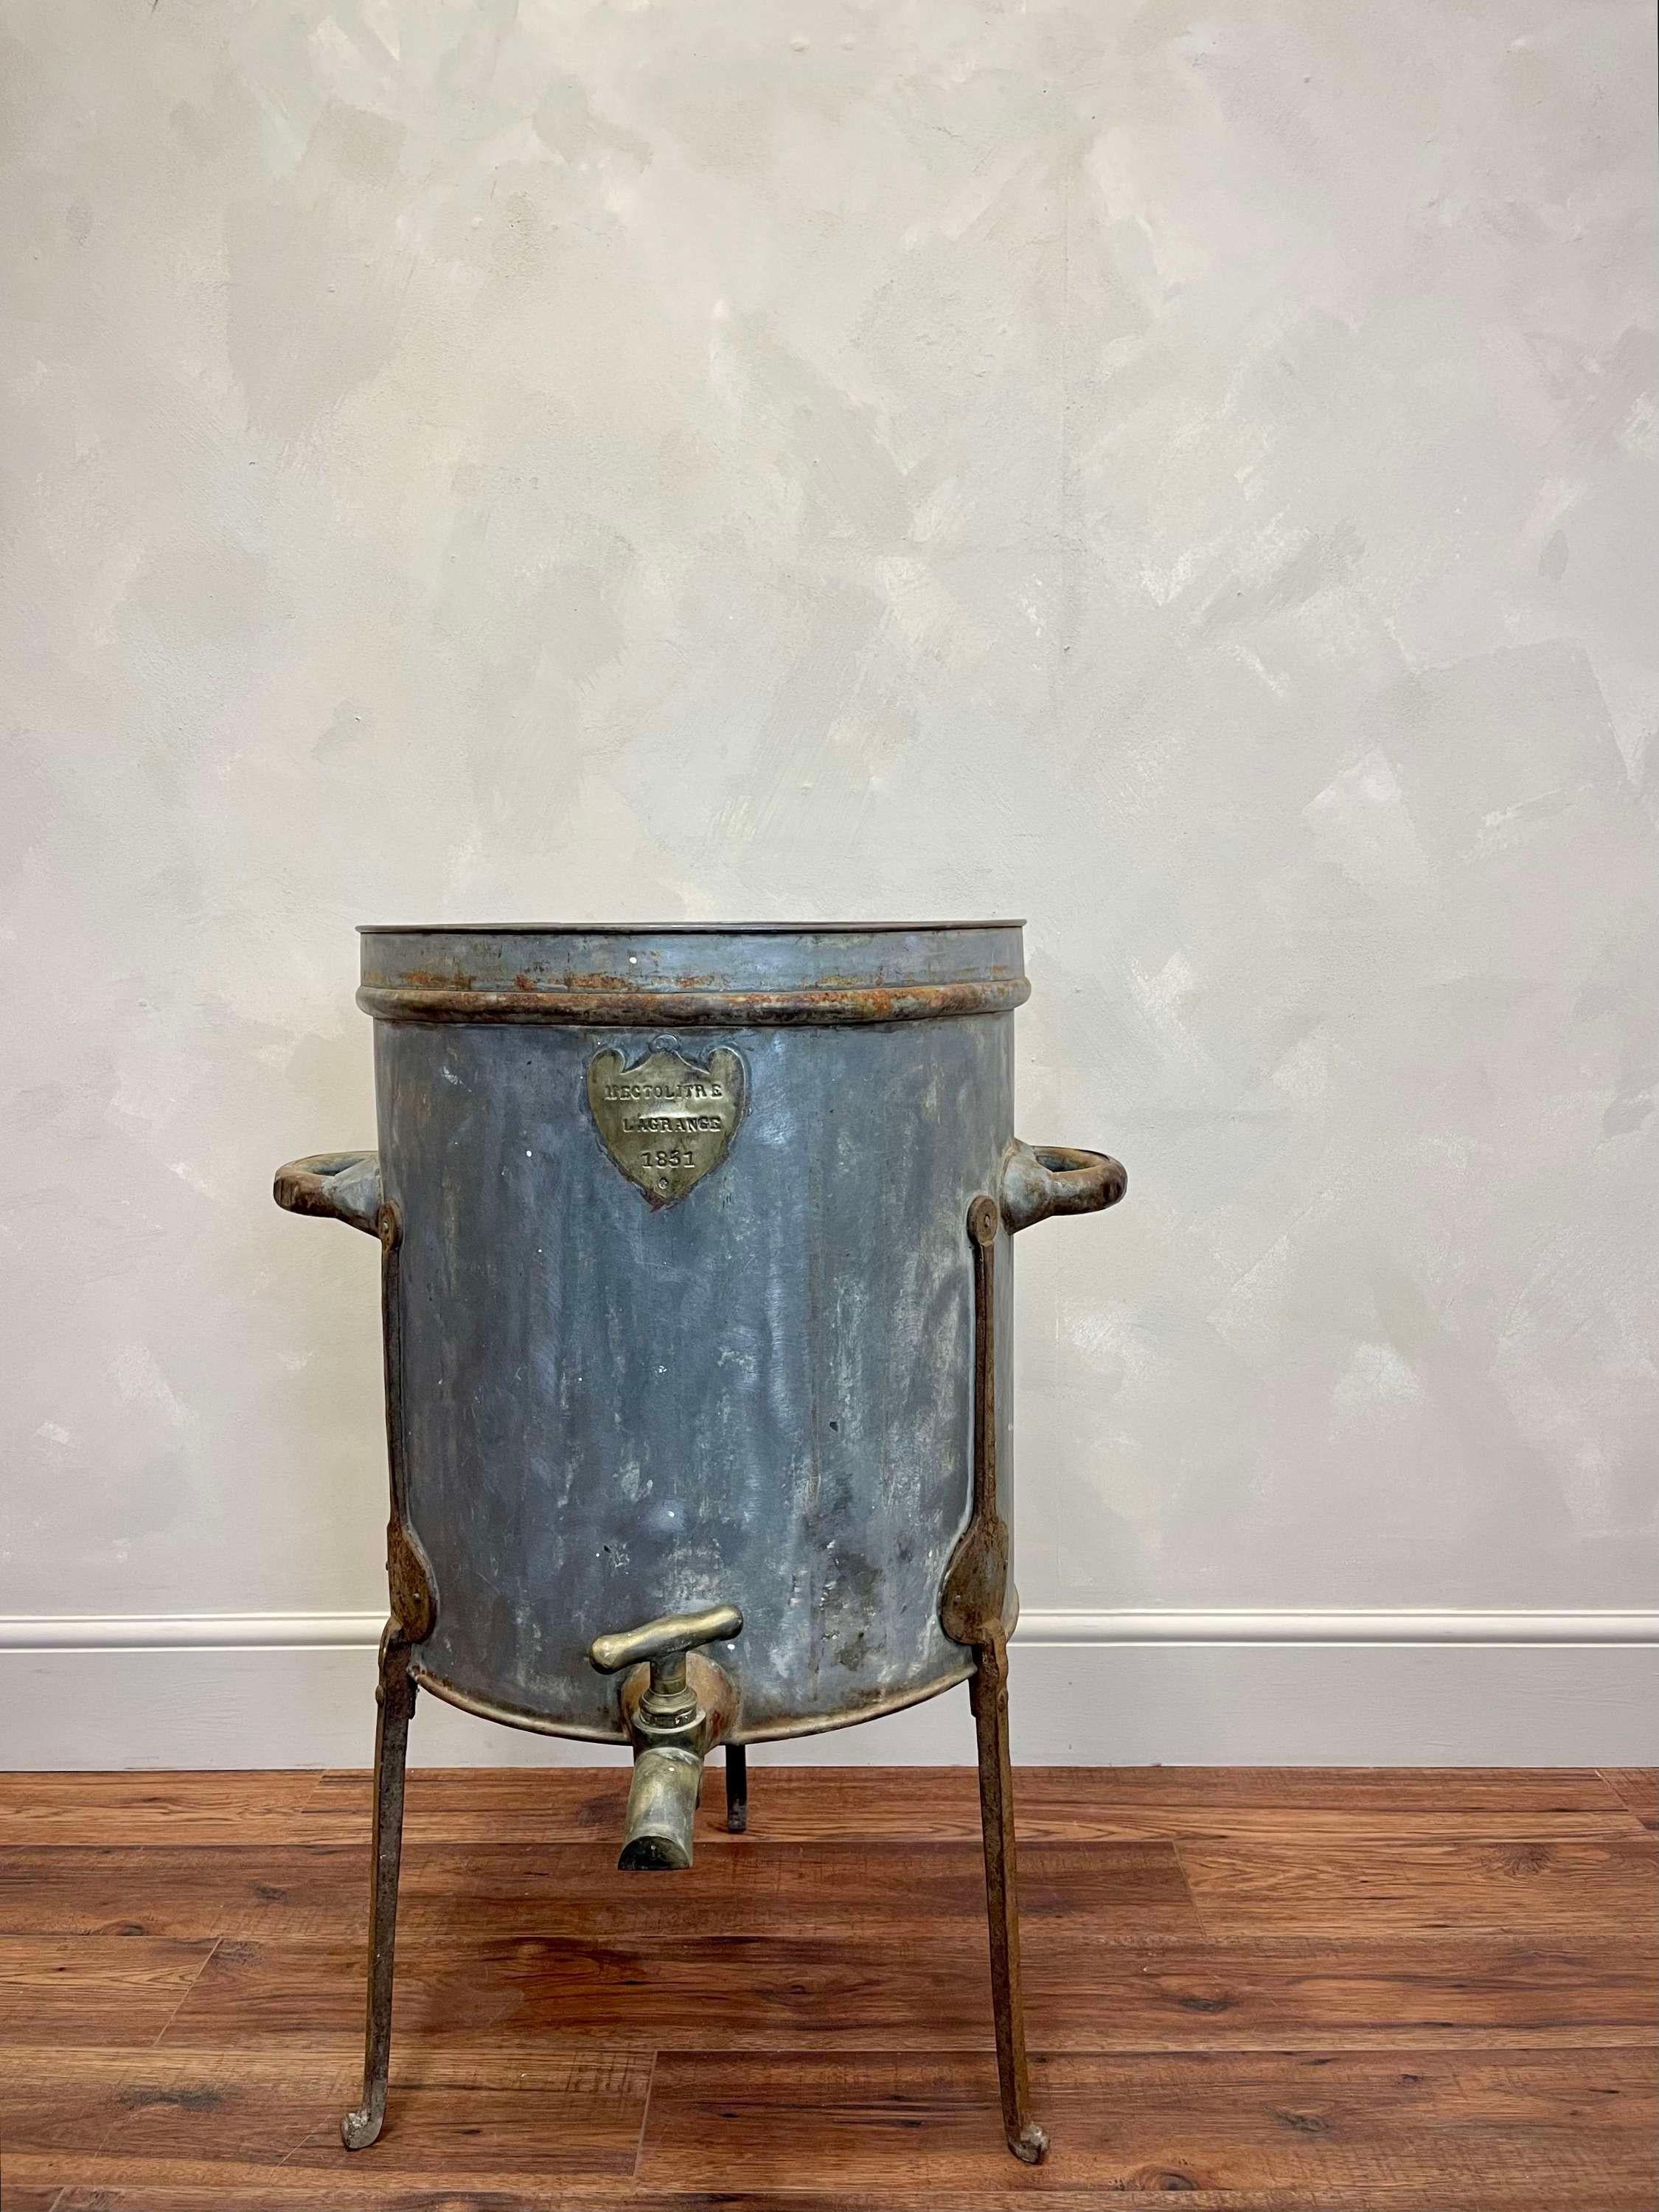 Very decorative, large scale French 19th c Hectolitre. This rare copper and brass wine barrel was used by wineries to measure and pour their wines into bottles, in preparation for consumption or sale.
This example has developed a wonderful patina